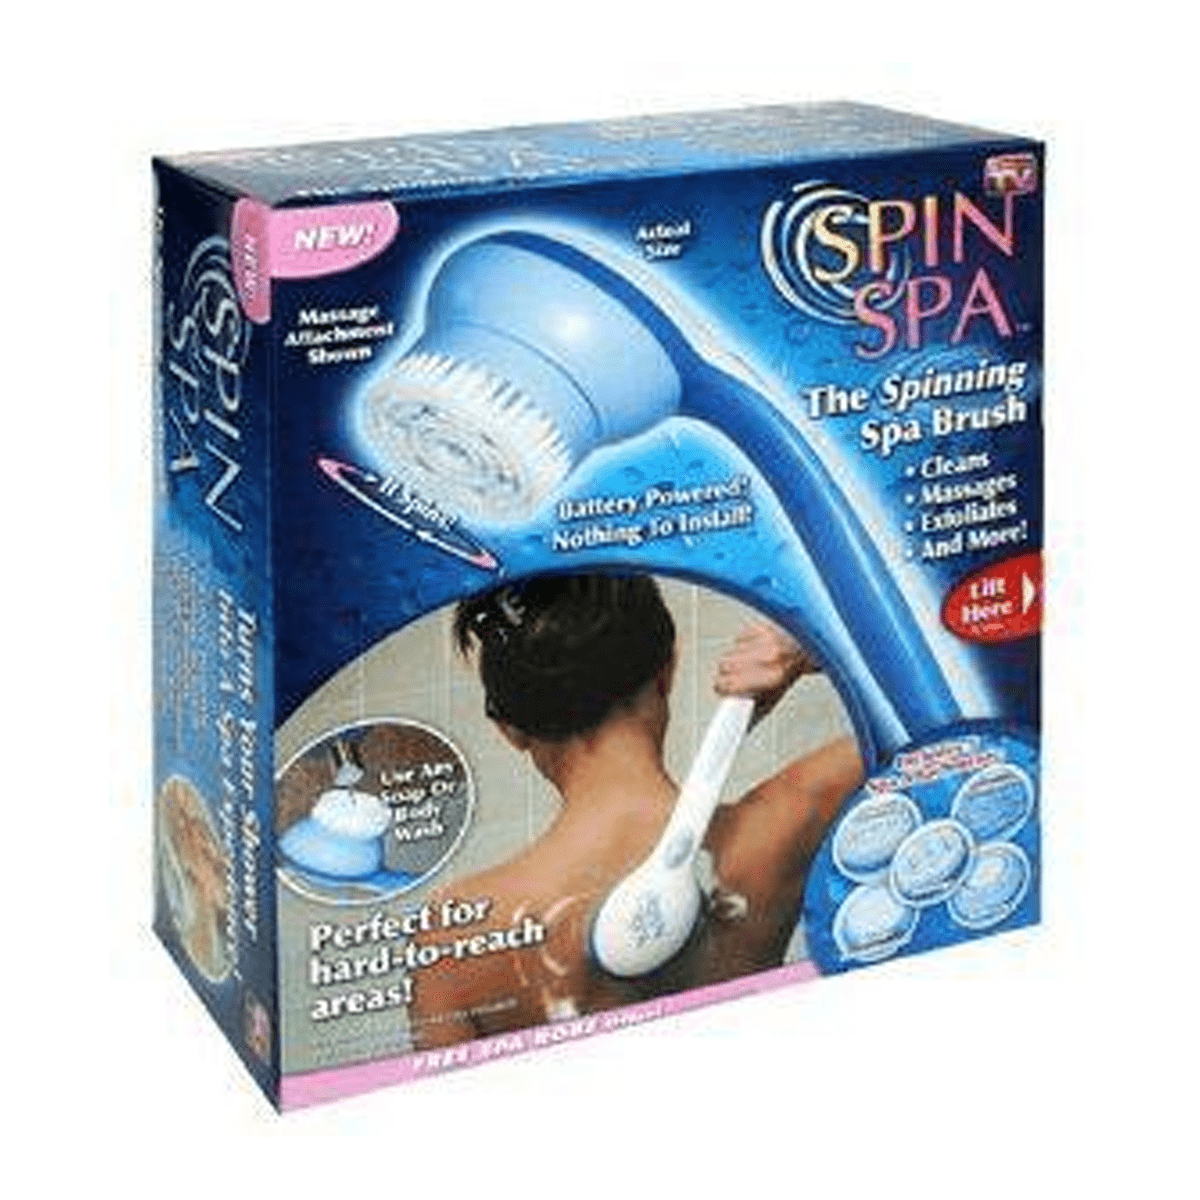 The Spinning Spa Brush